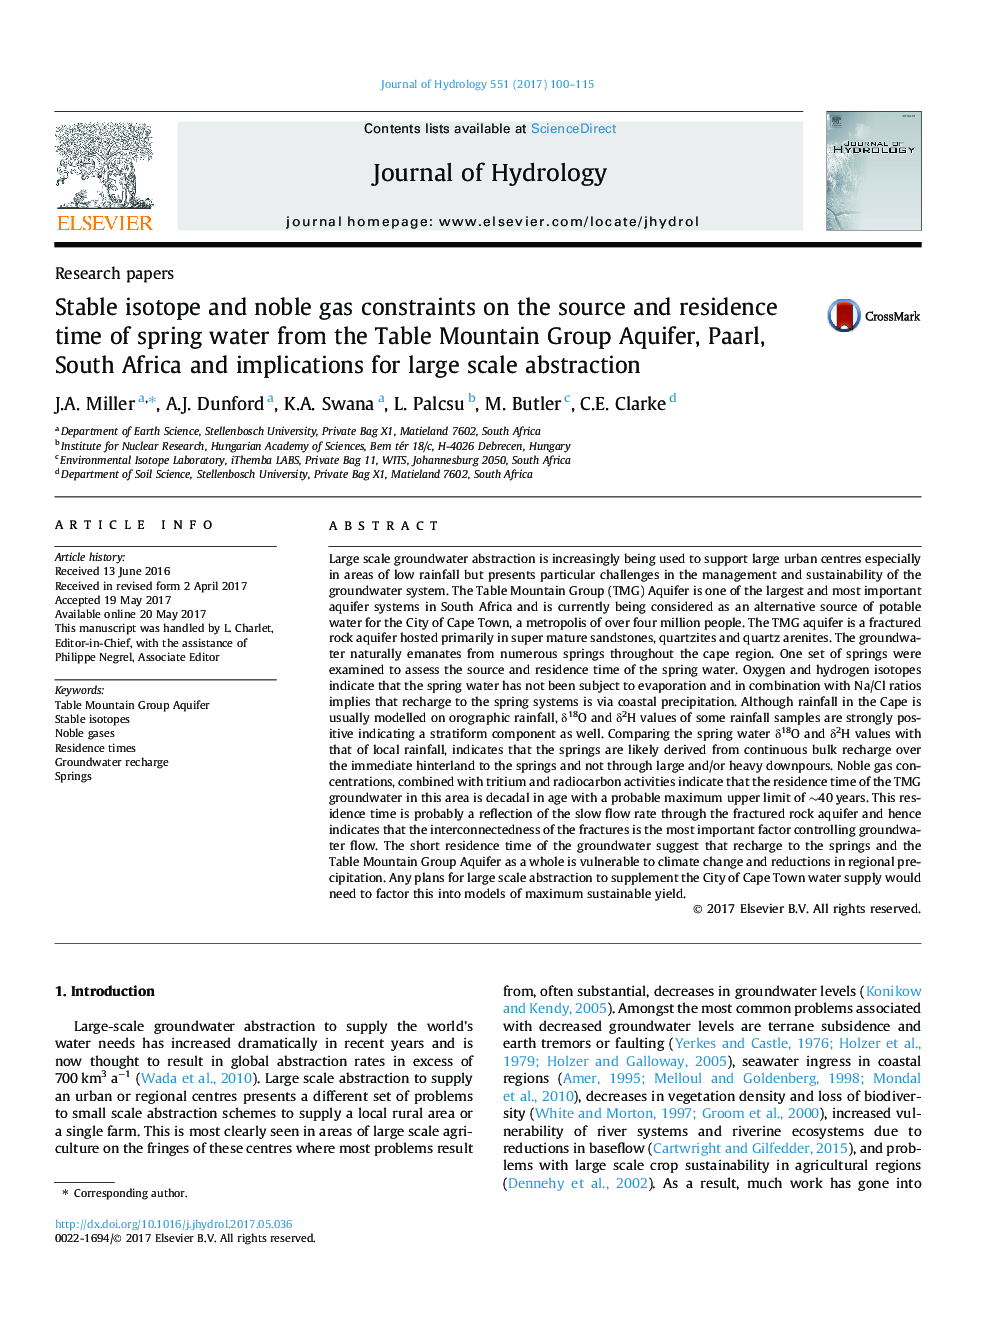 Research papersStable isotope and noble gas constraints on the source and residence time of spring water from the Table Mountain Group Aquifer, Paarl, South Africa and implications for large scale abstraction